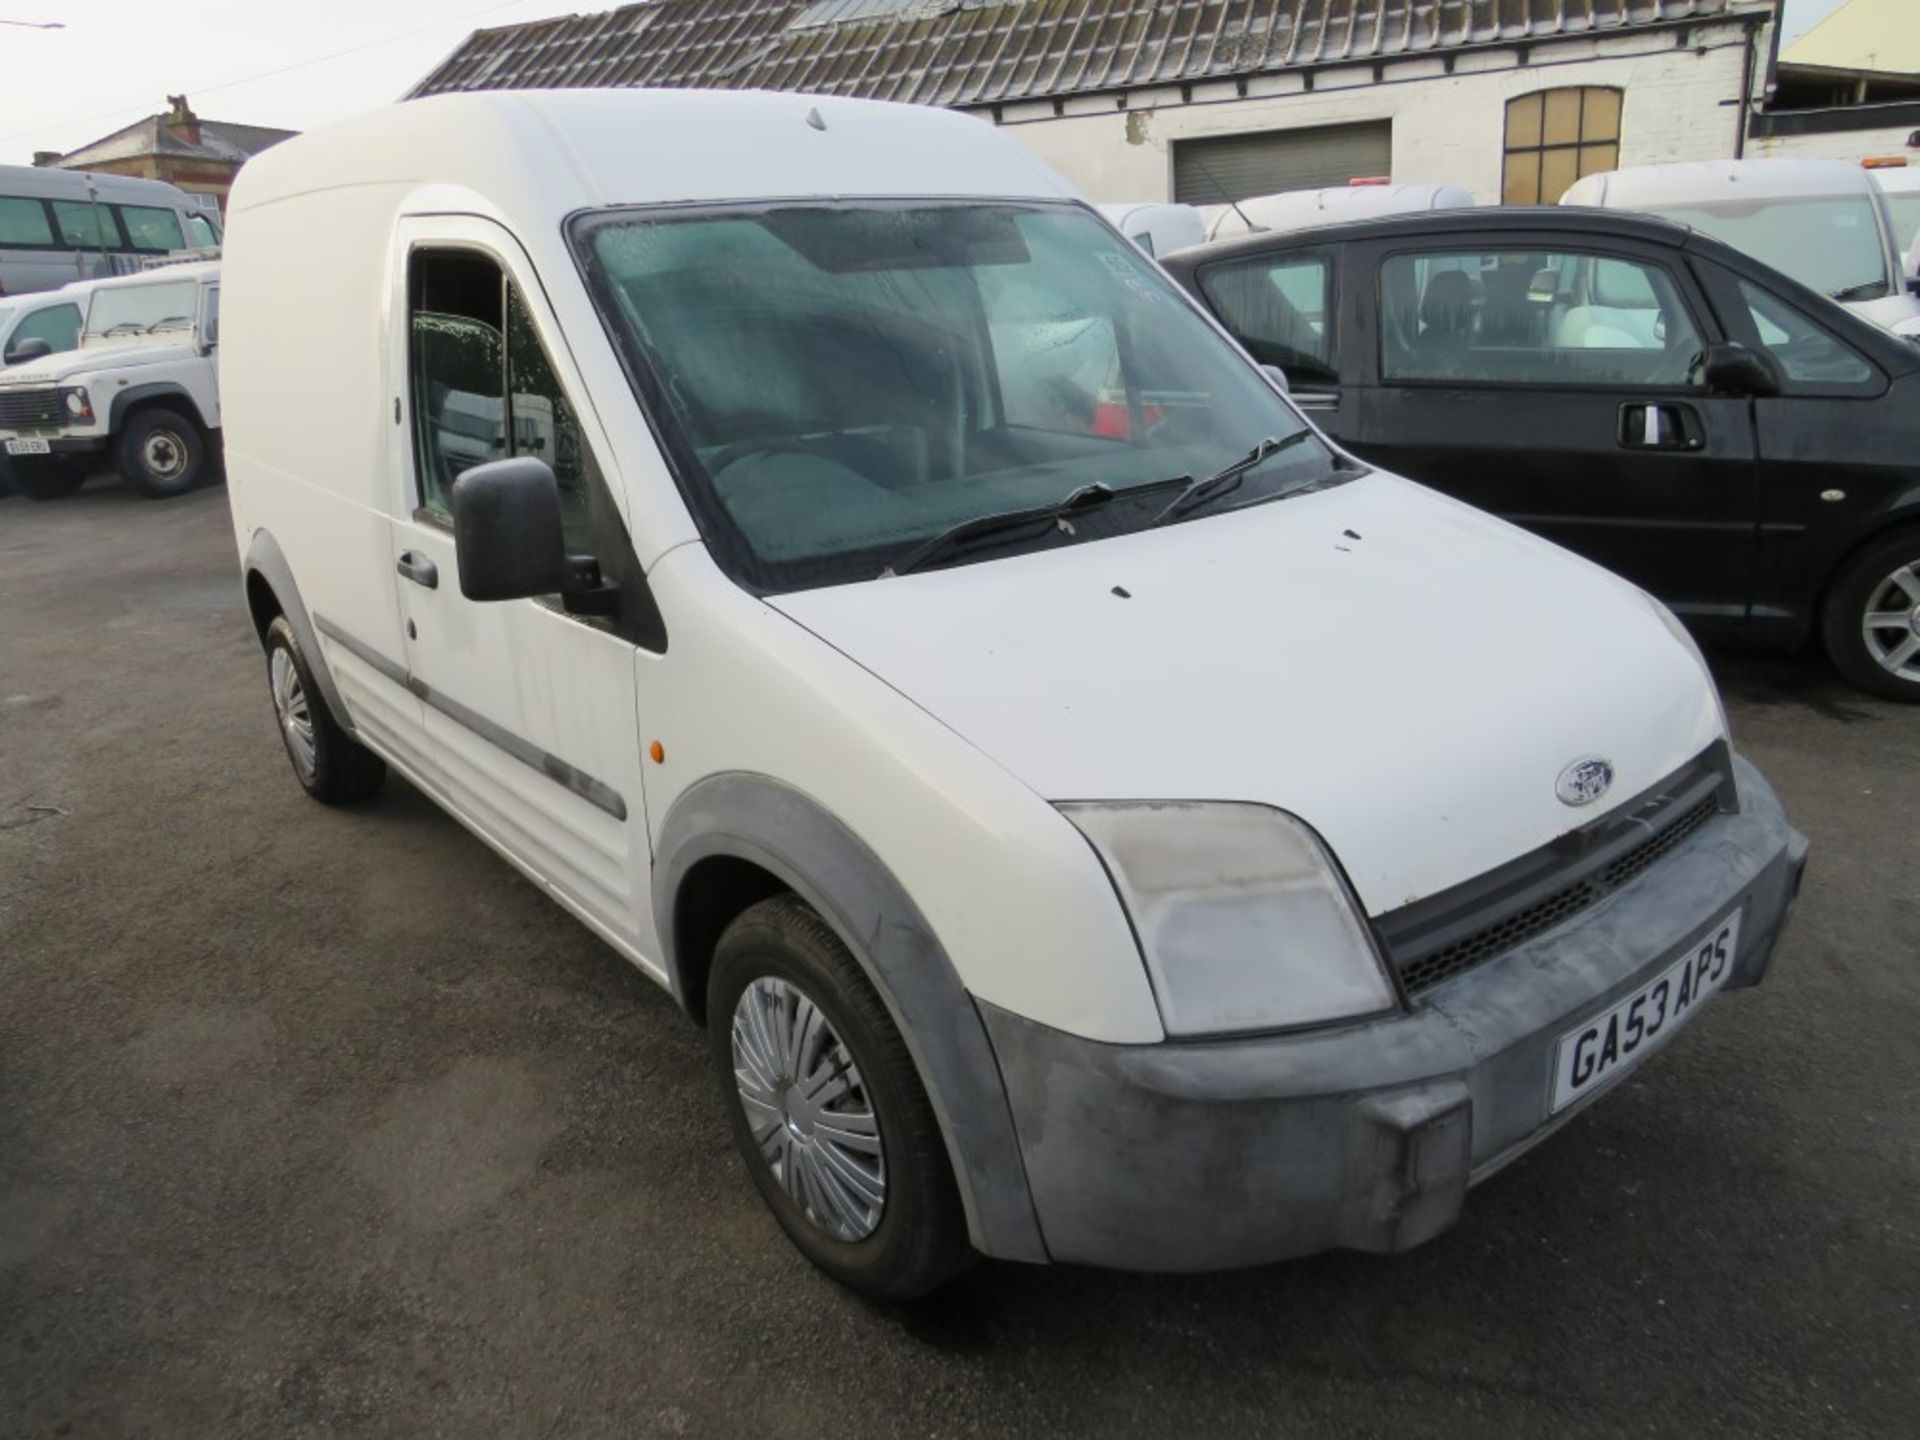 53 reg FORD TRANSIT CONNECT L230 D, TEST 01/20, 130320M NOT WARRANTED, V5 HERE, 10 FORMER KEEPERS [